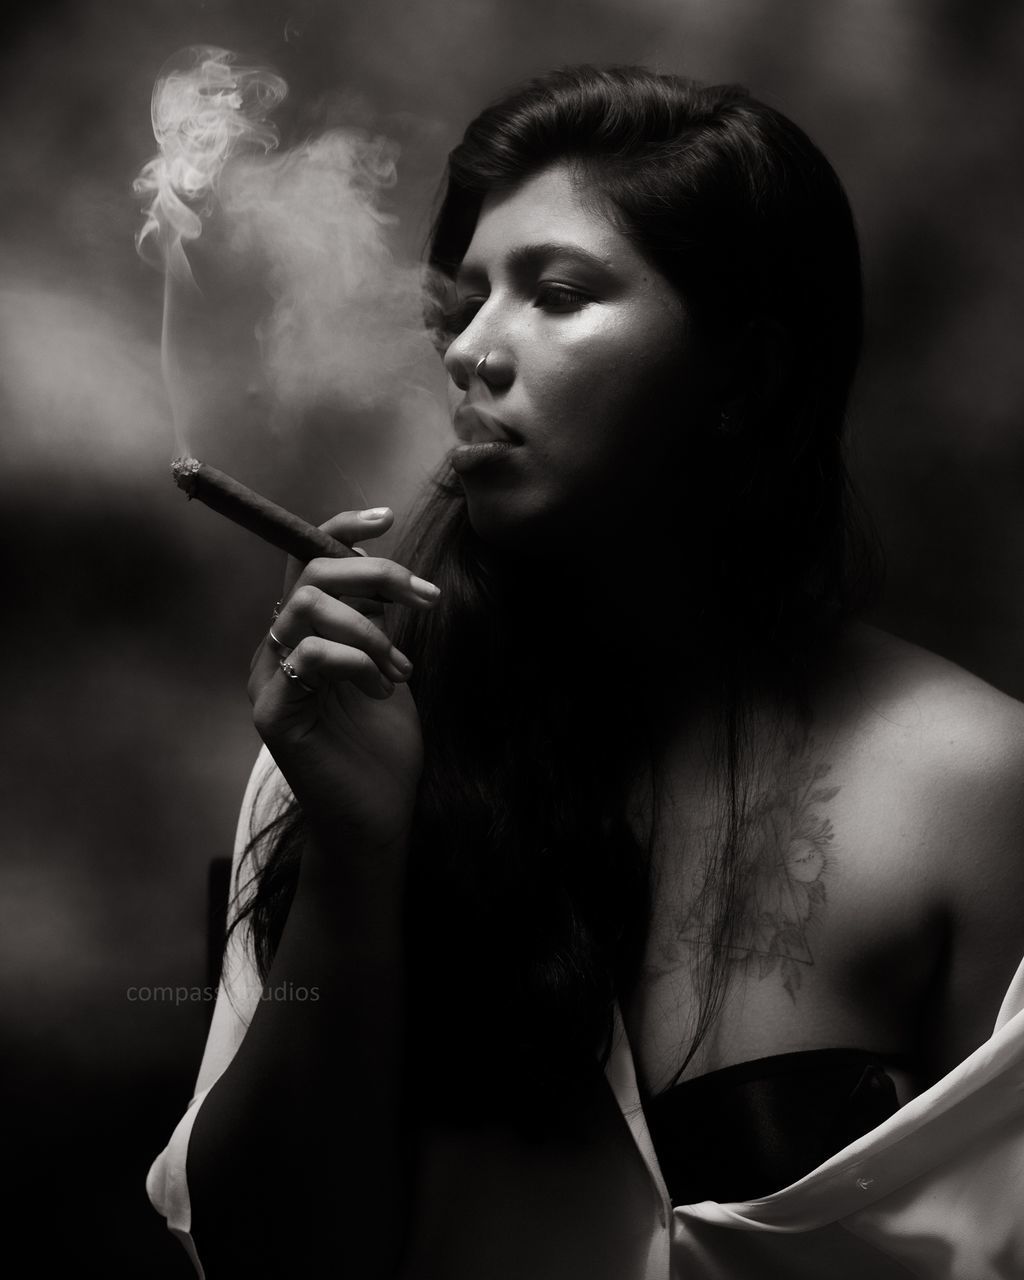 PORTRAIT OF YOUNG WOMAN SMOKING CIGARETTE